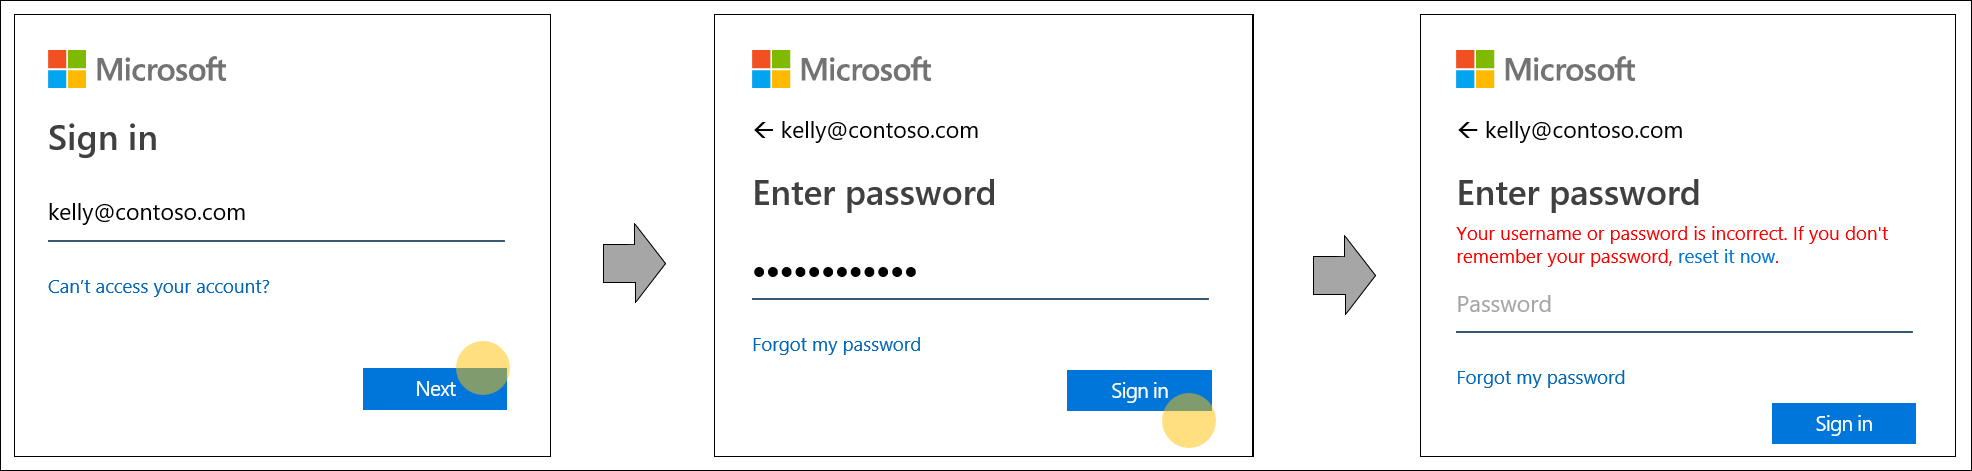 password is mistyped with good username